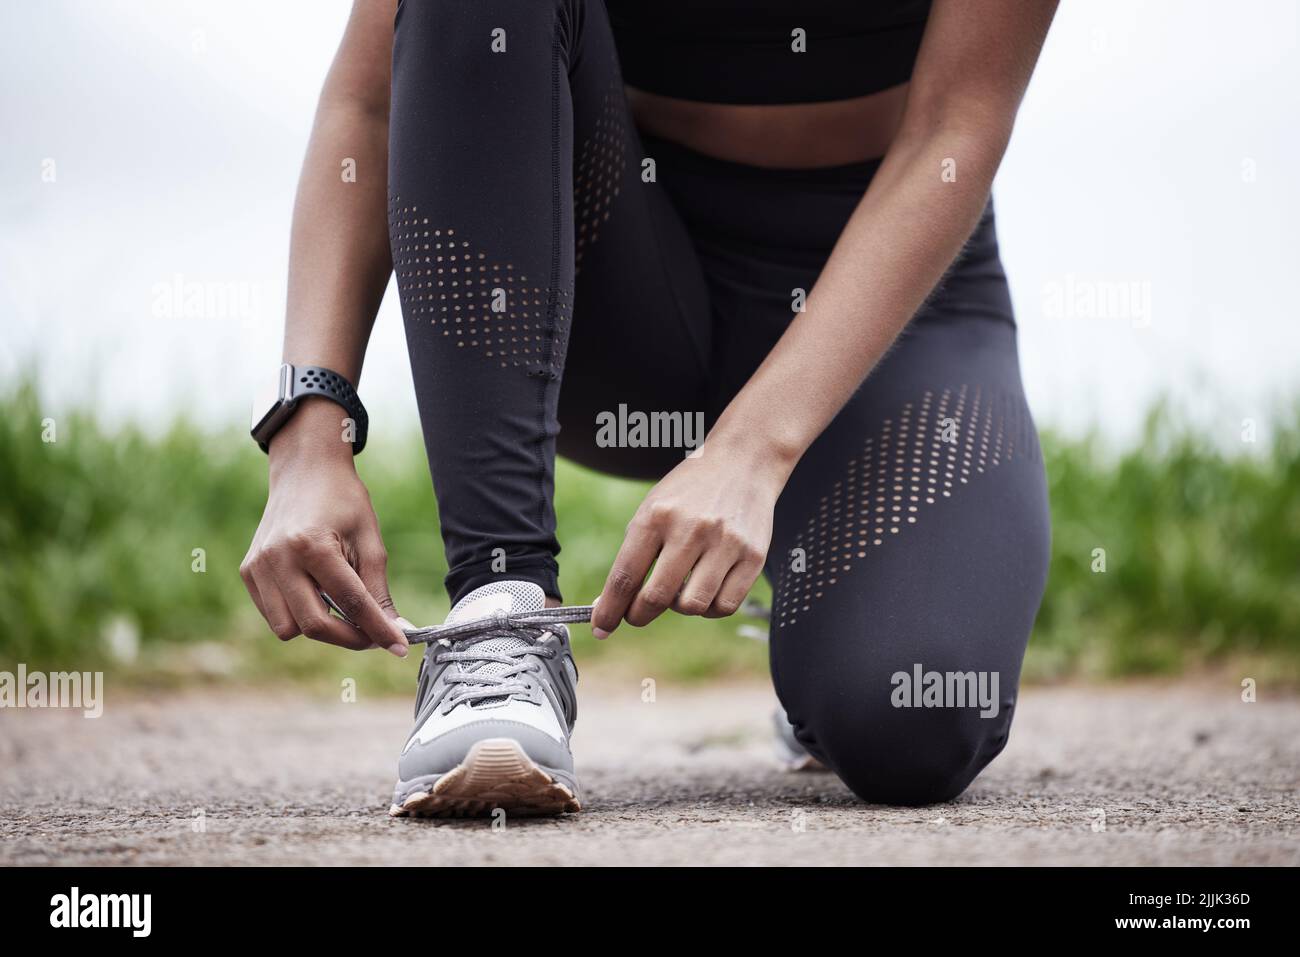 Ready to give it her all. Closeup shot of an unrecognisable woman tying her shoelaces while exercising outdoors. Stock Photo